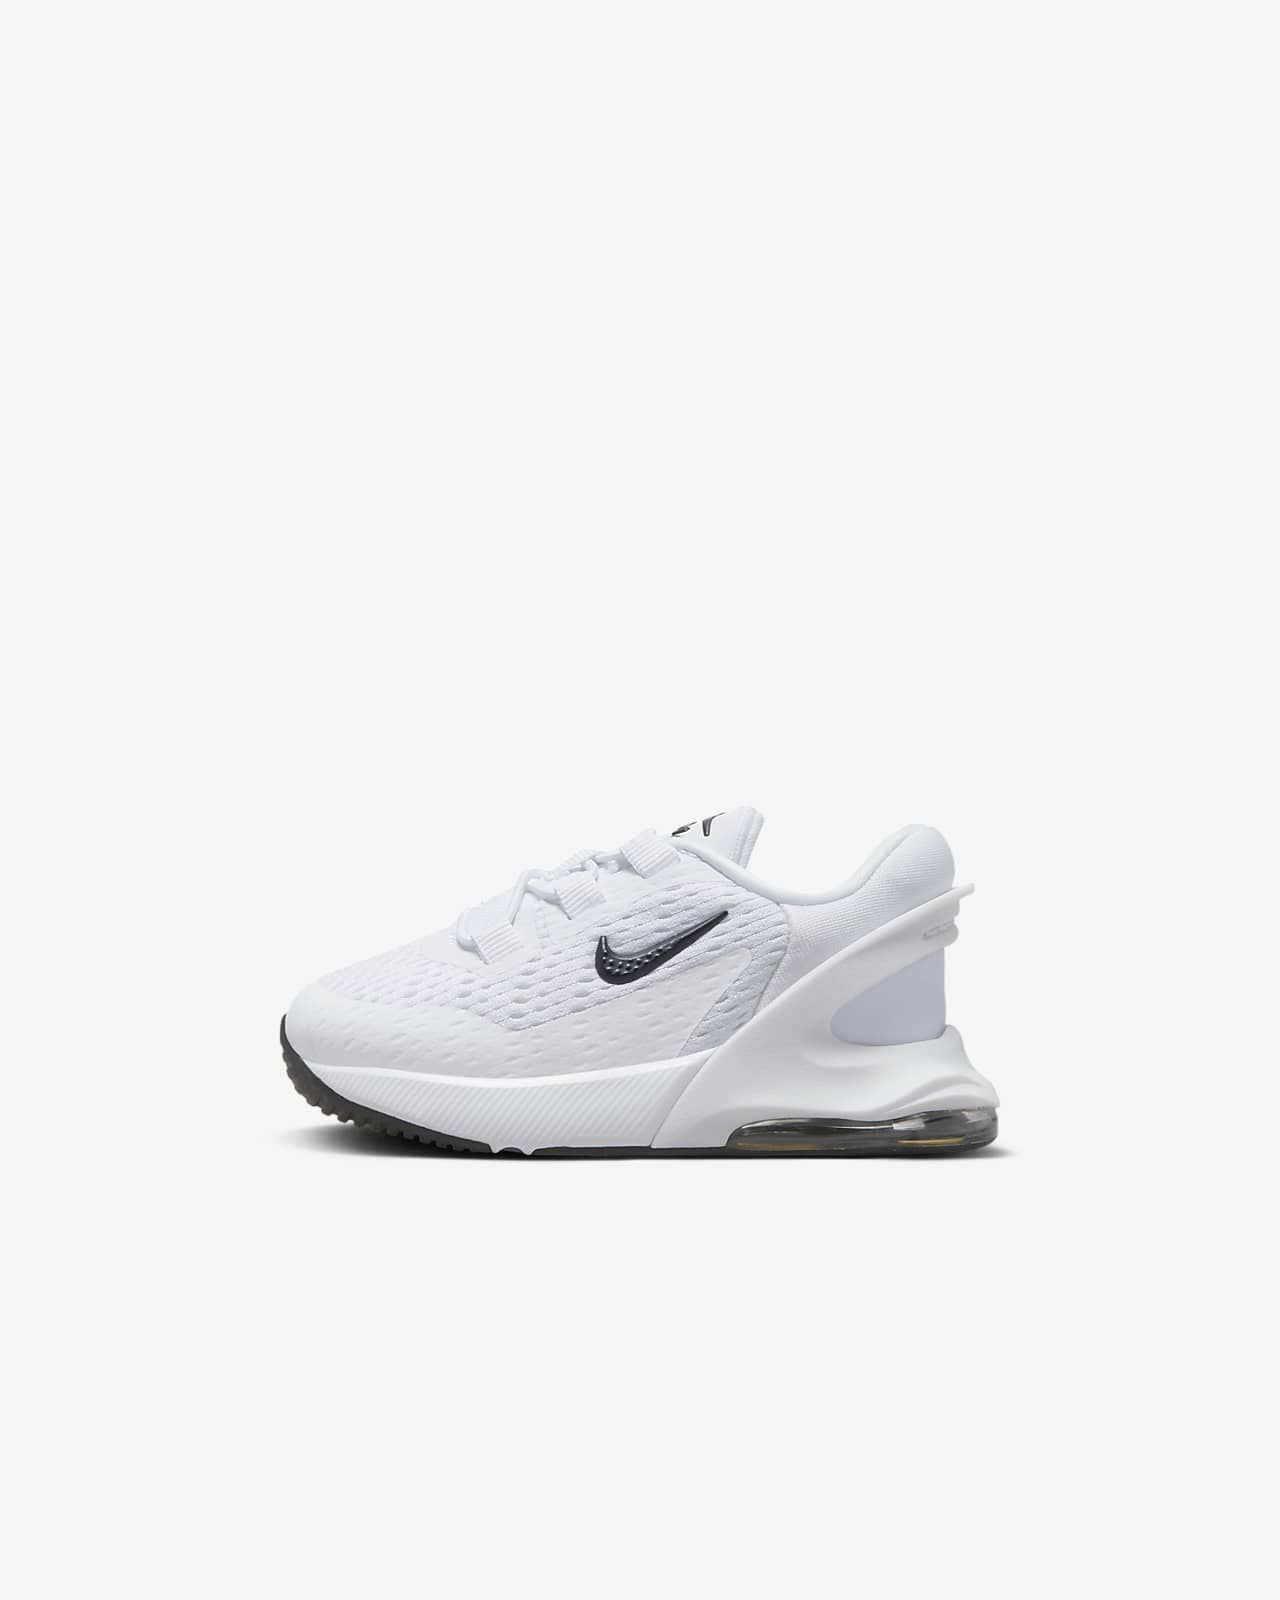 Nike Air Max 270 GO Baby/Toddler Easy On/Off Shoes. Nike.com | Nike (US)